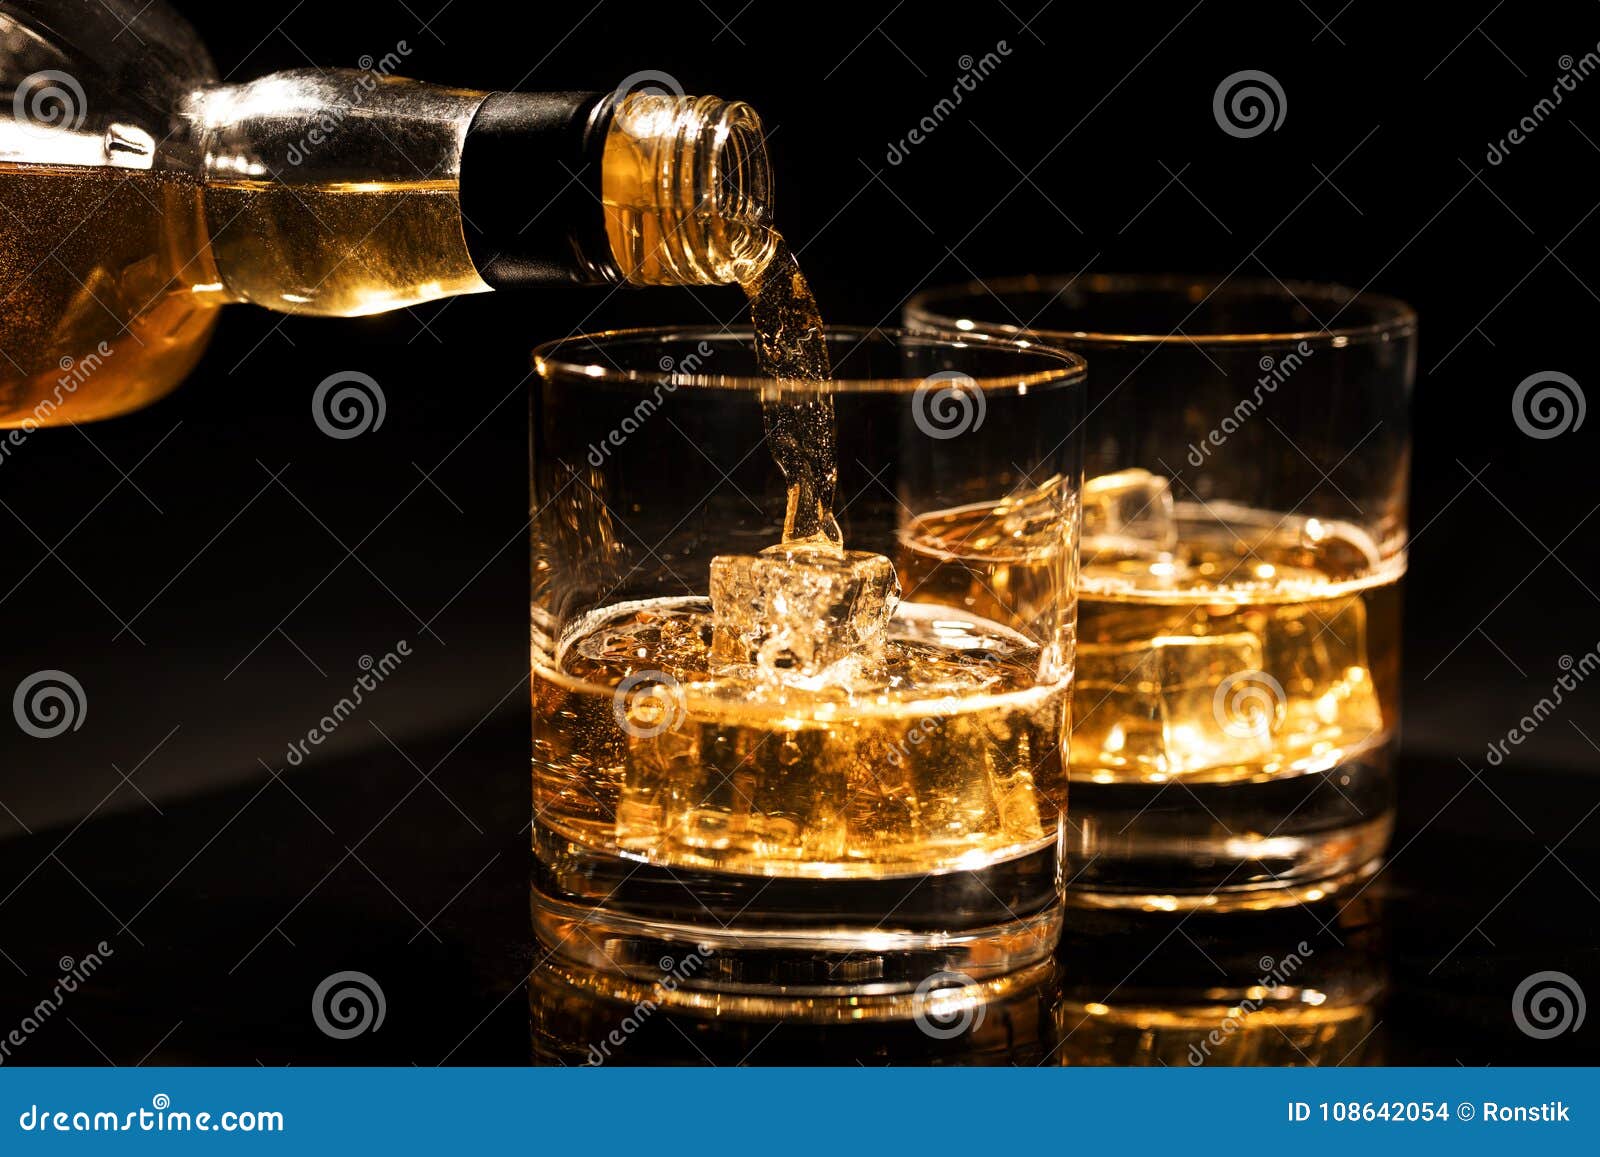 pouring whiskey into a glass from bottle with ice cubes on black